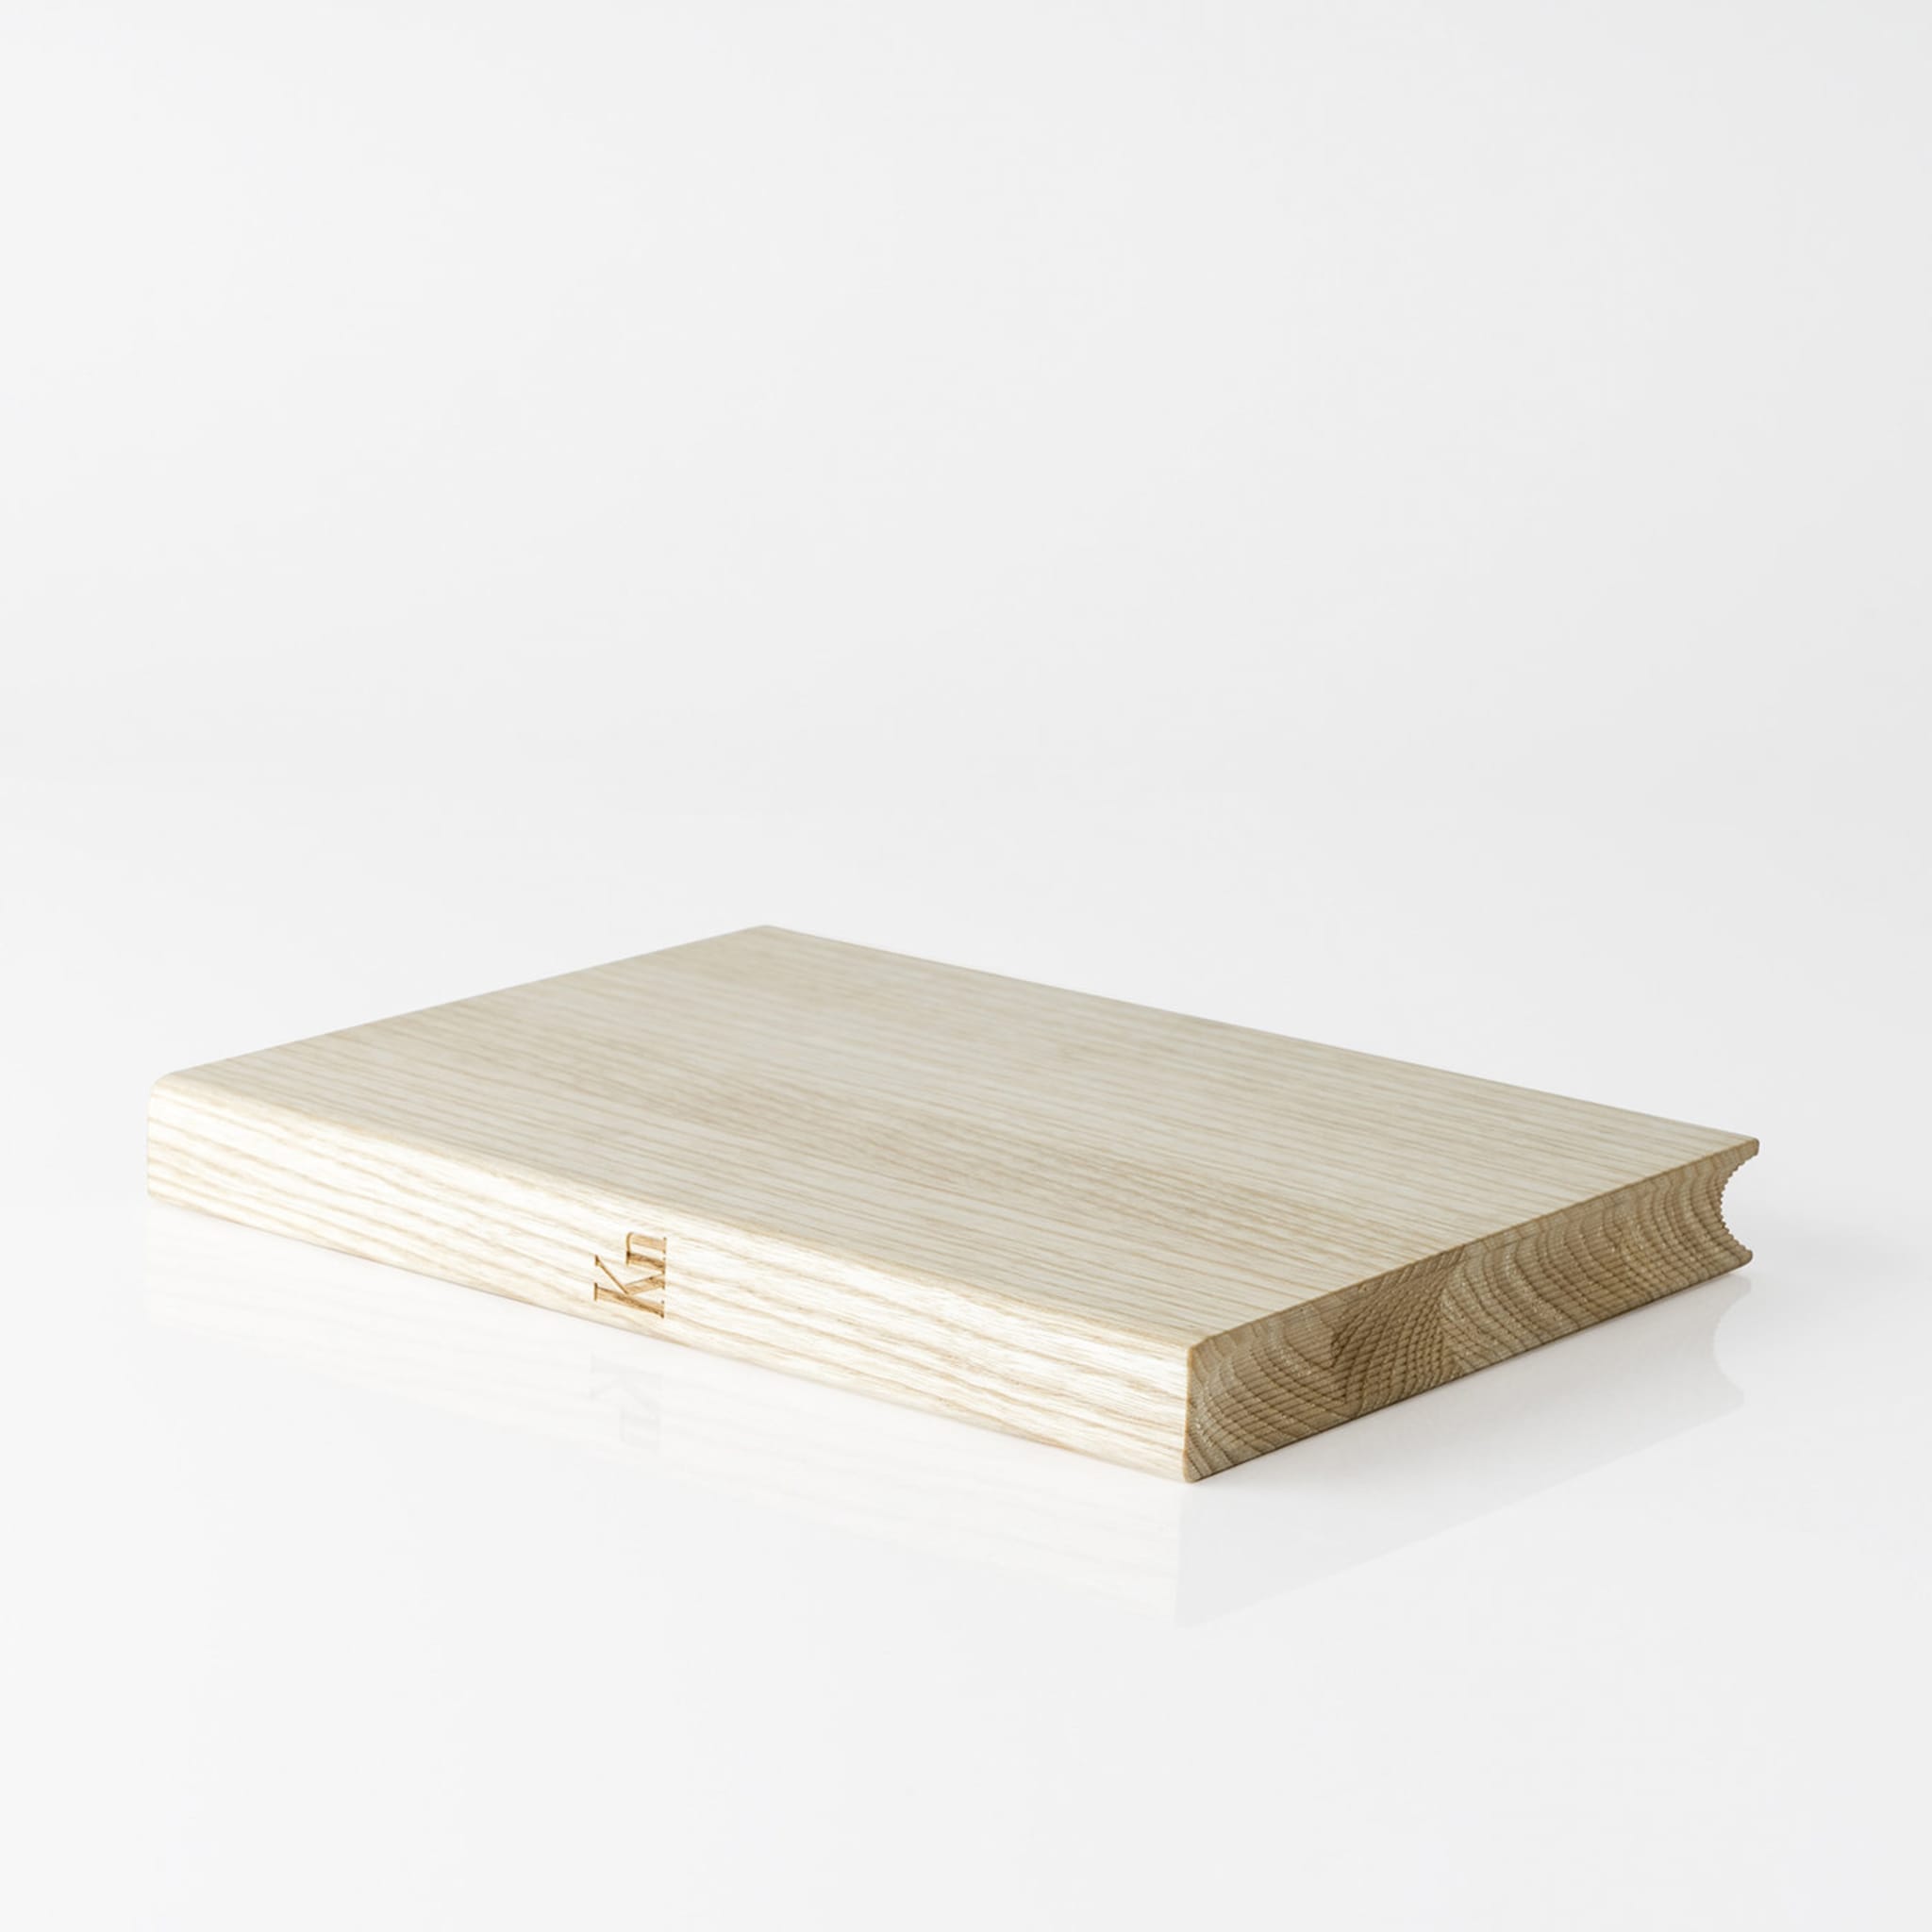 KN Book Set of 3 Cutting Boards by Roberto Vaia - Alternative view 4